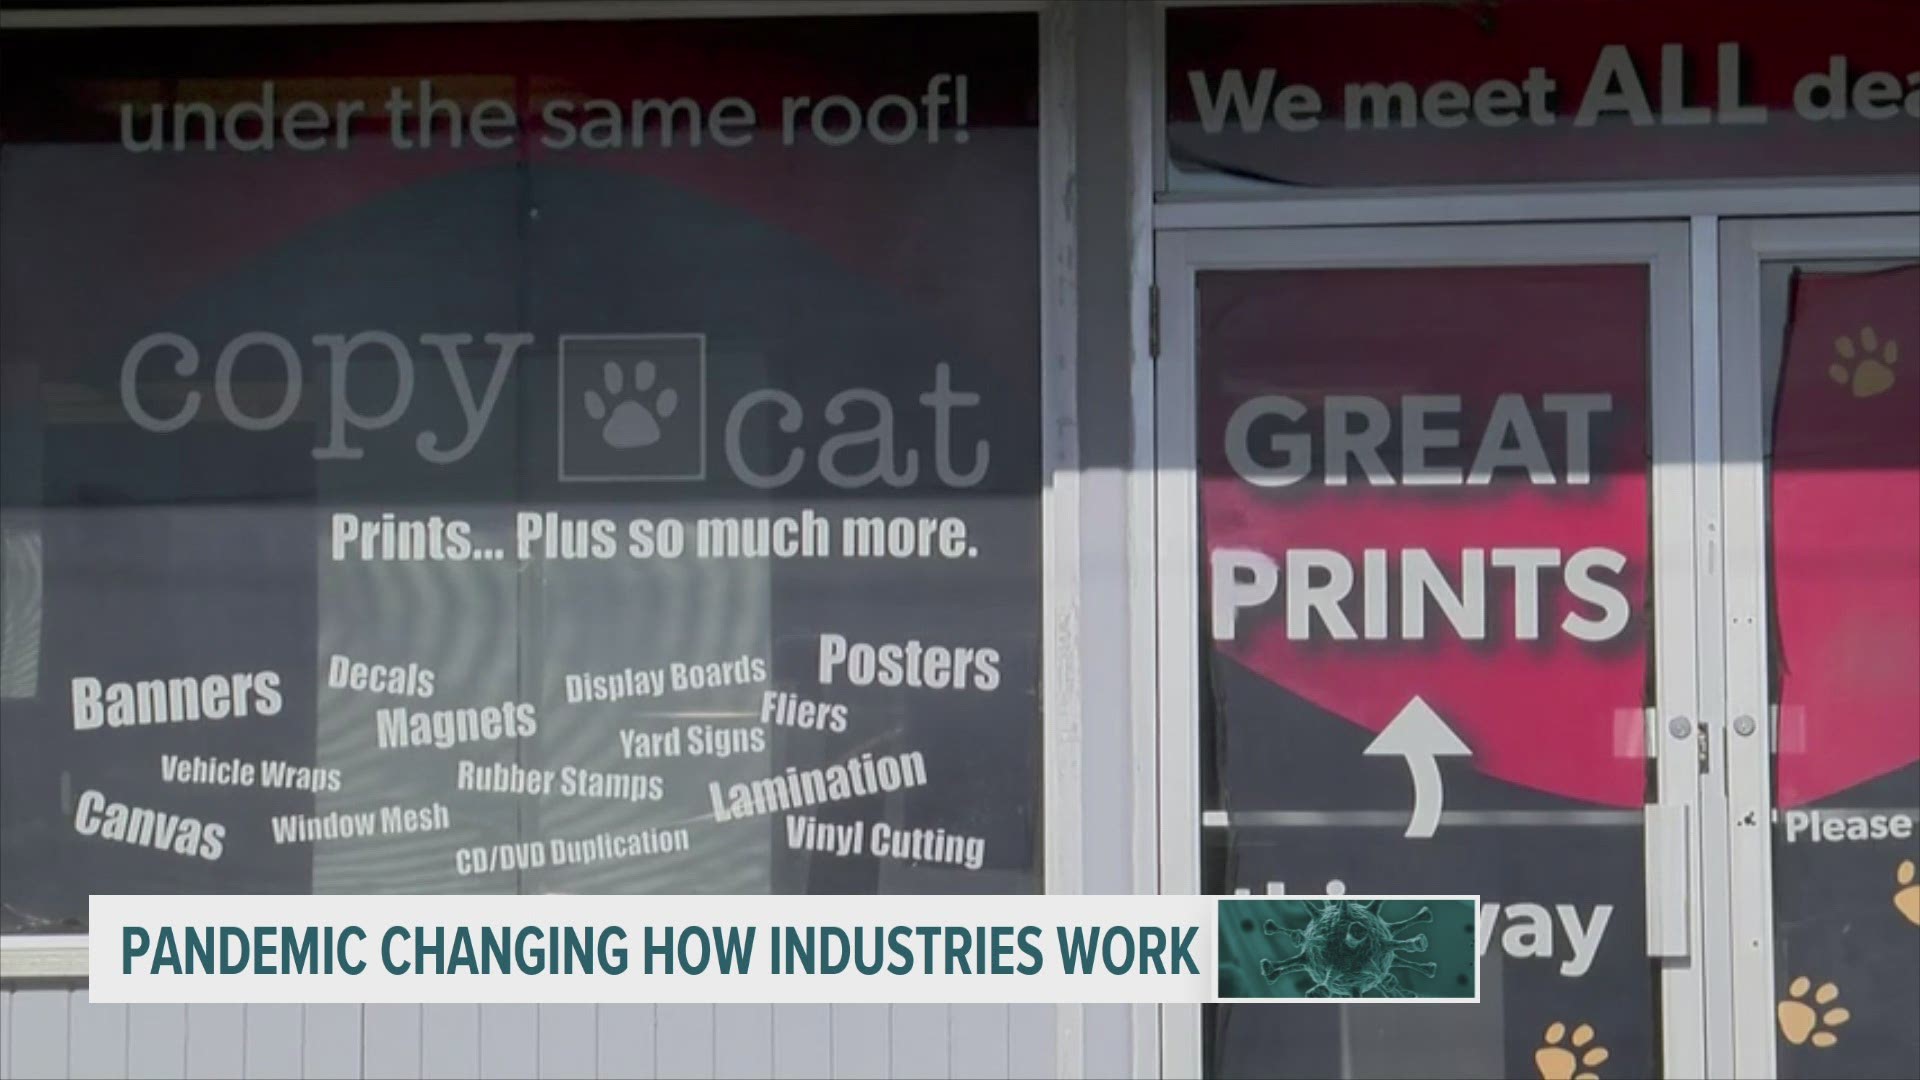 Copycat Print Services says sales are down nearly 70 percent.